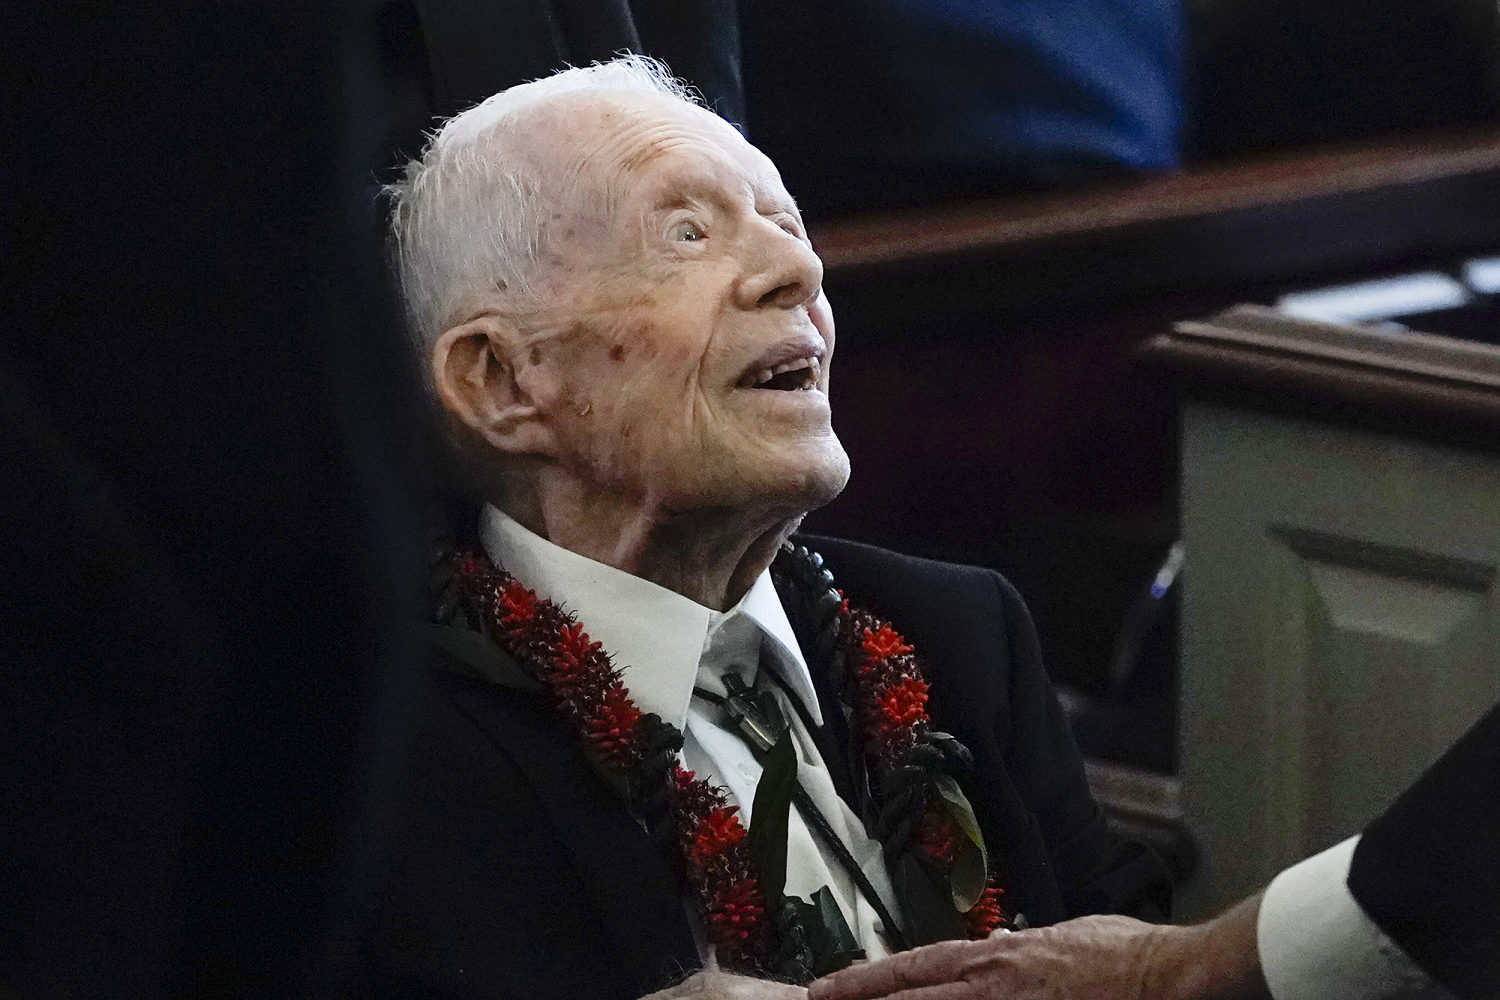 Jimmy Carter, 99, is holding out to vote for Kamala Harris, his grandson says